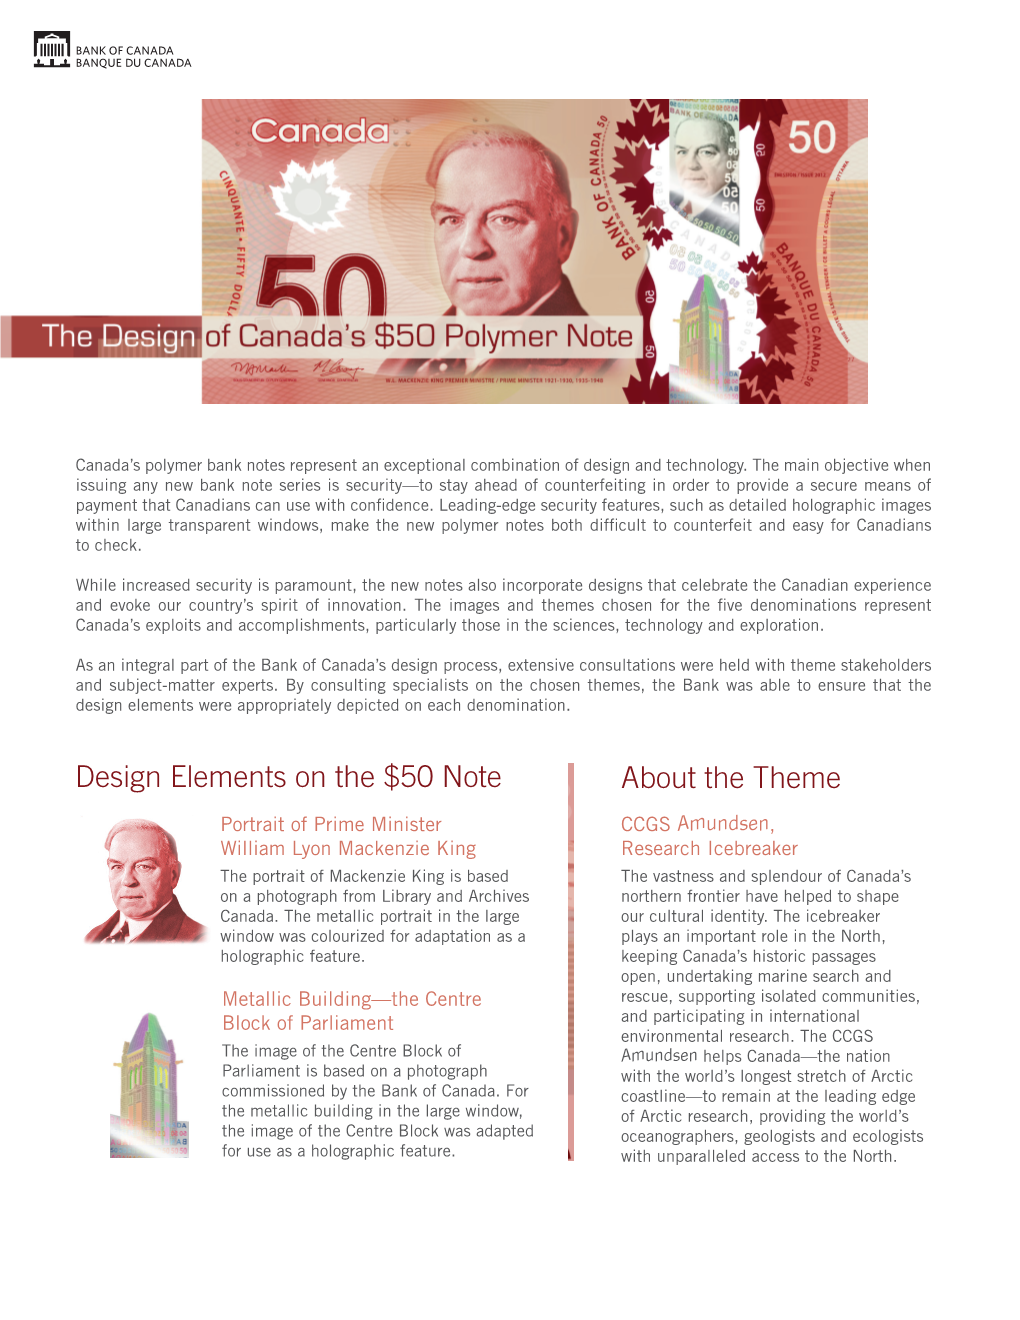 Design Elements on the $50 Note About the Theme